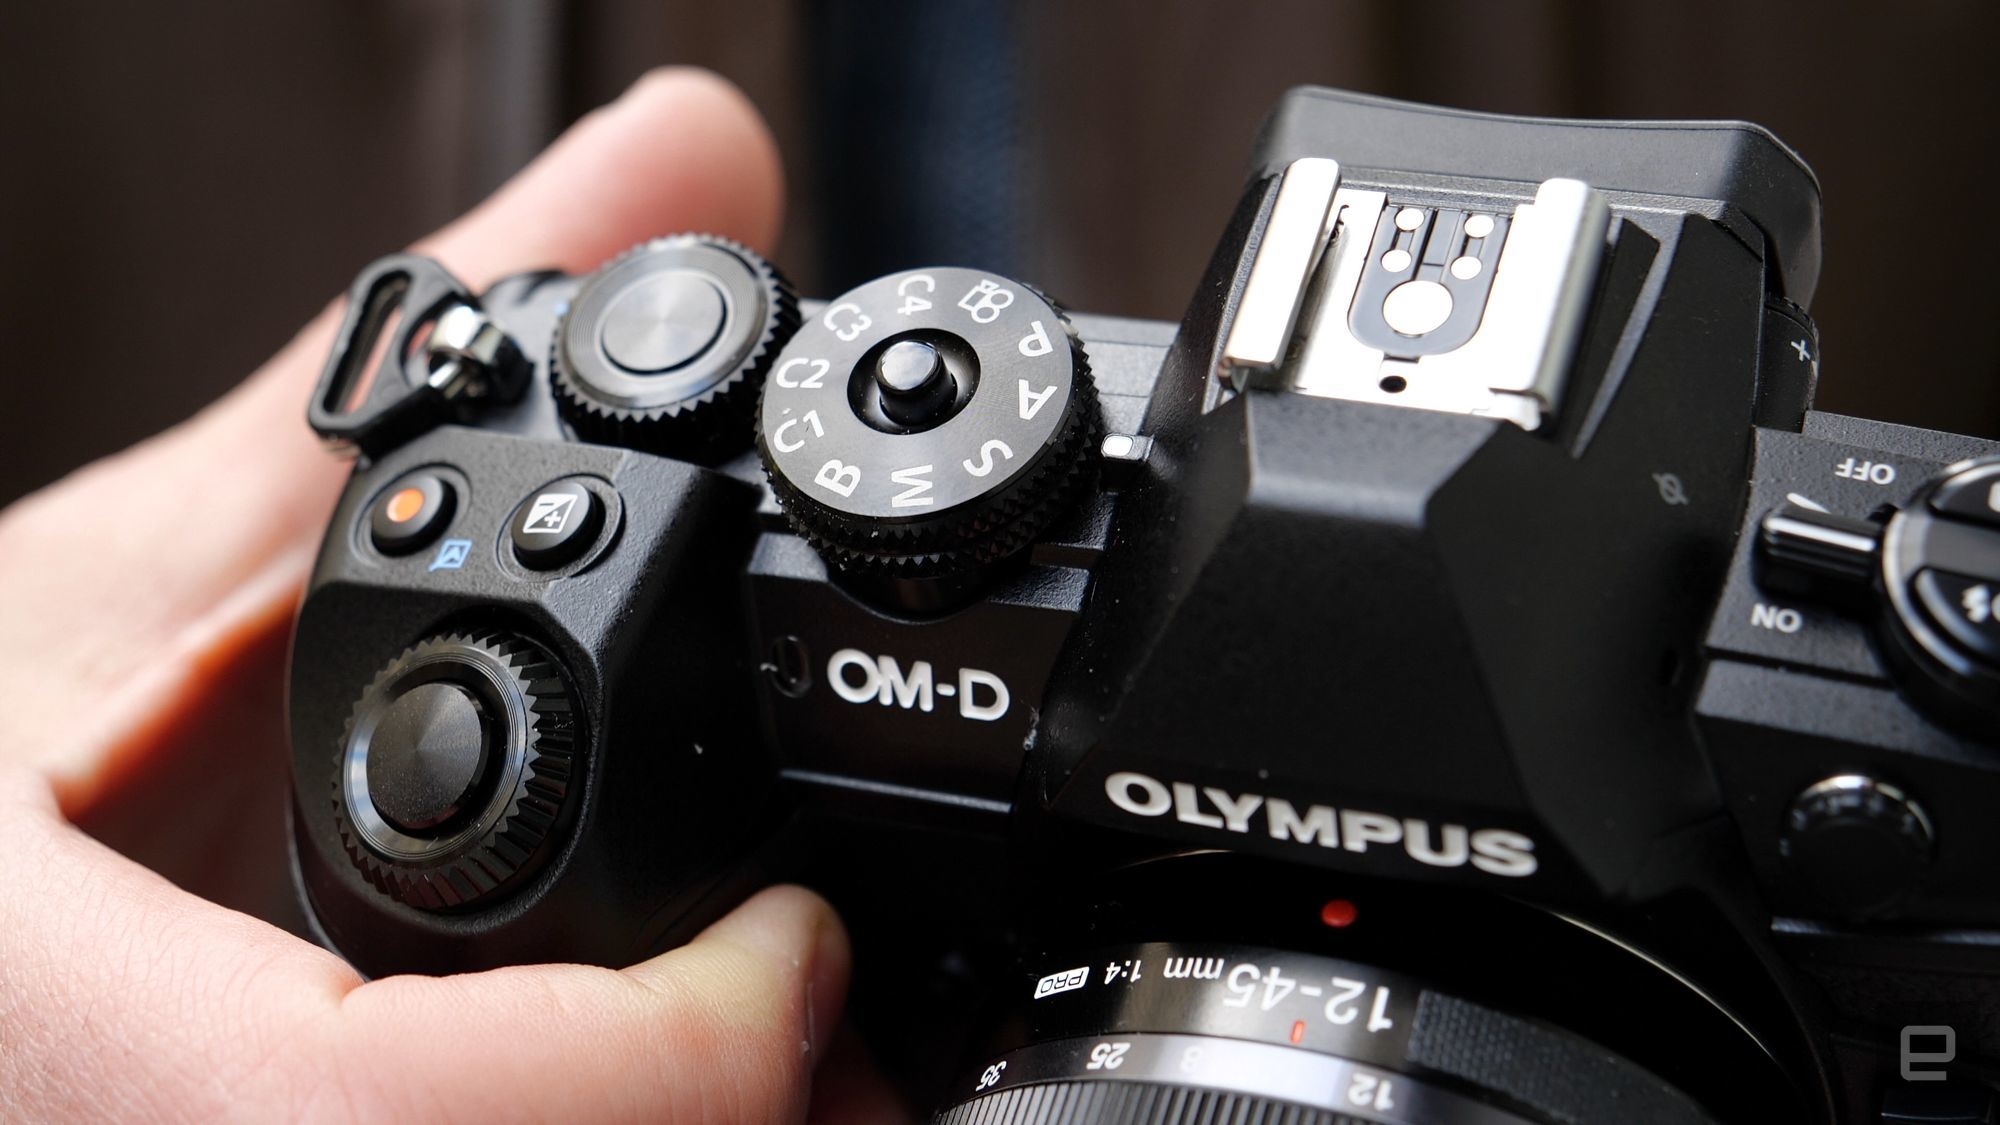 Olympus E-M1 III review: Fast, but way behind flagship camera rivals | DeviceDaily.com